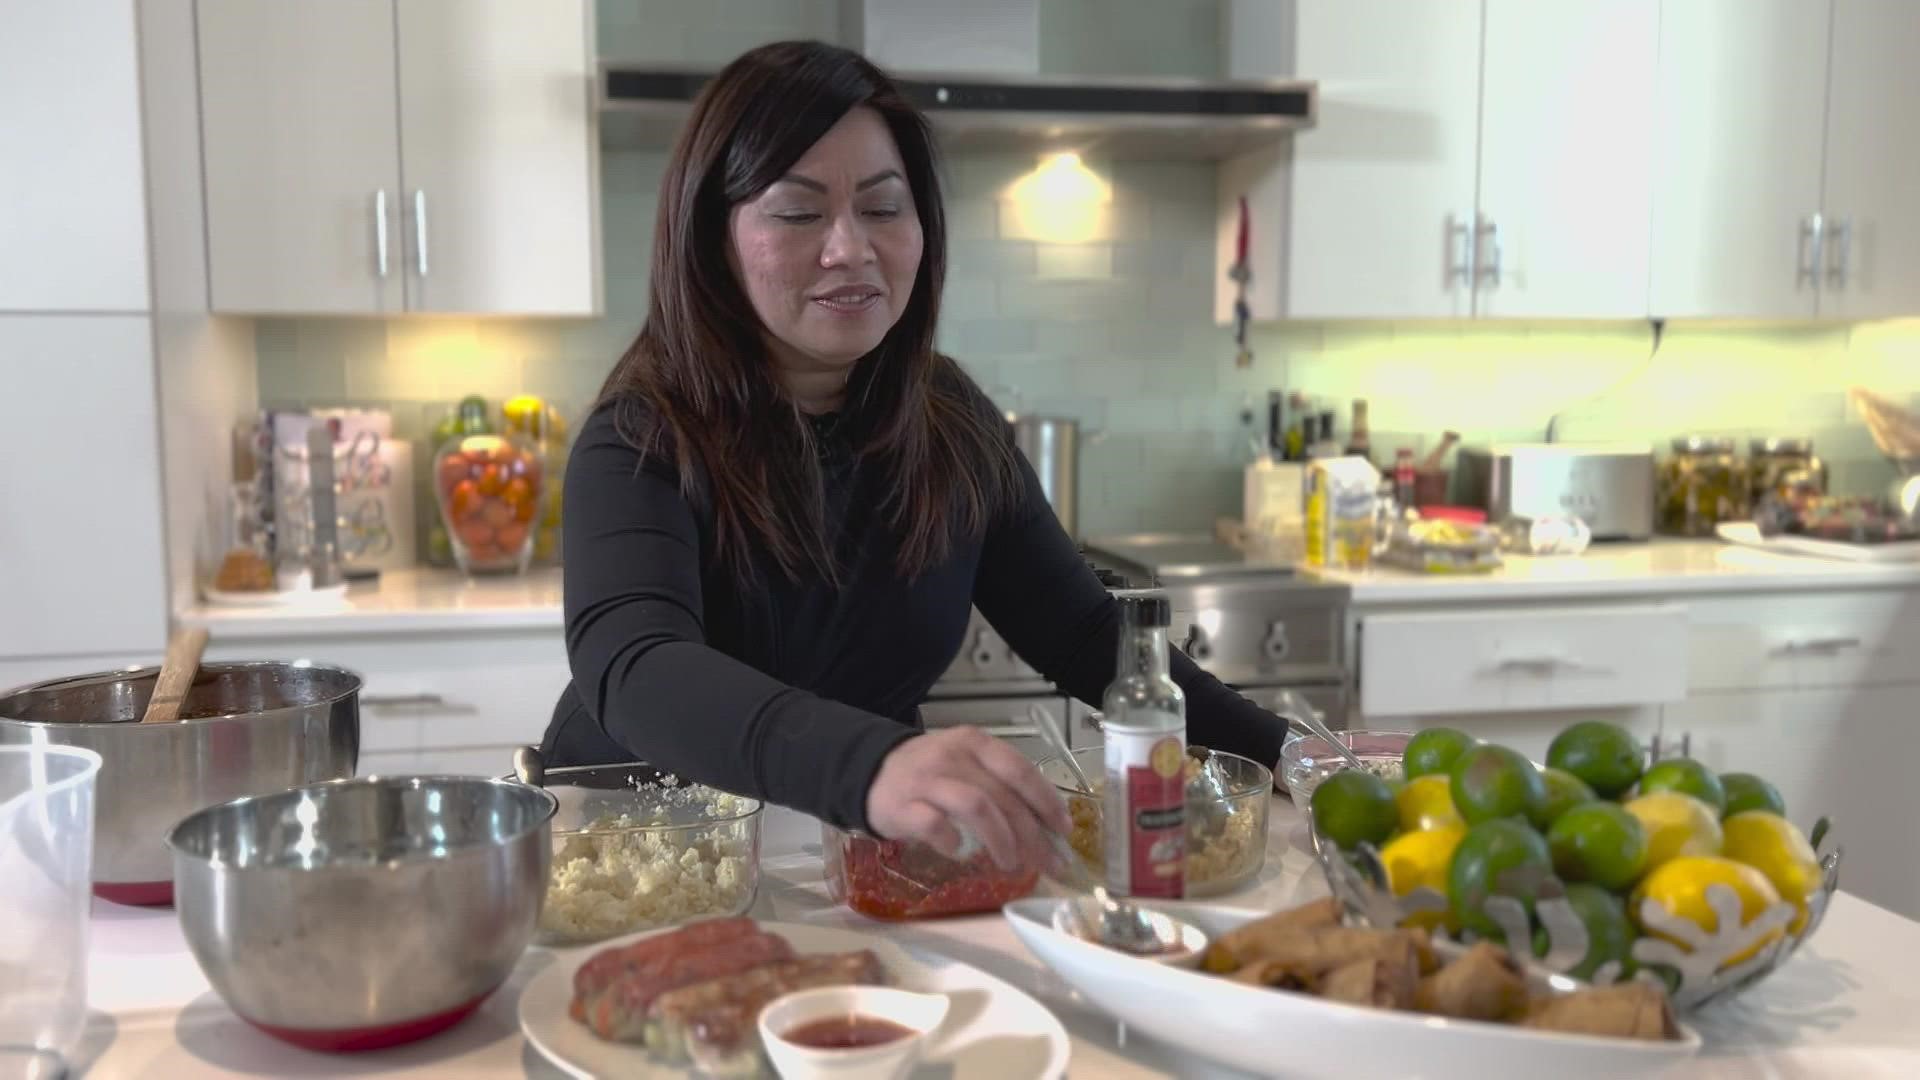 After her day job, Dr. Dane Hoang shares her Vietnamese culture by selling homemade nước chấm. The money raised goes to her nonprofit to help the community.